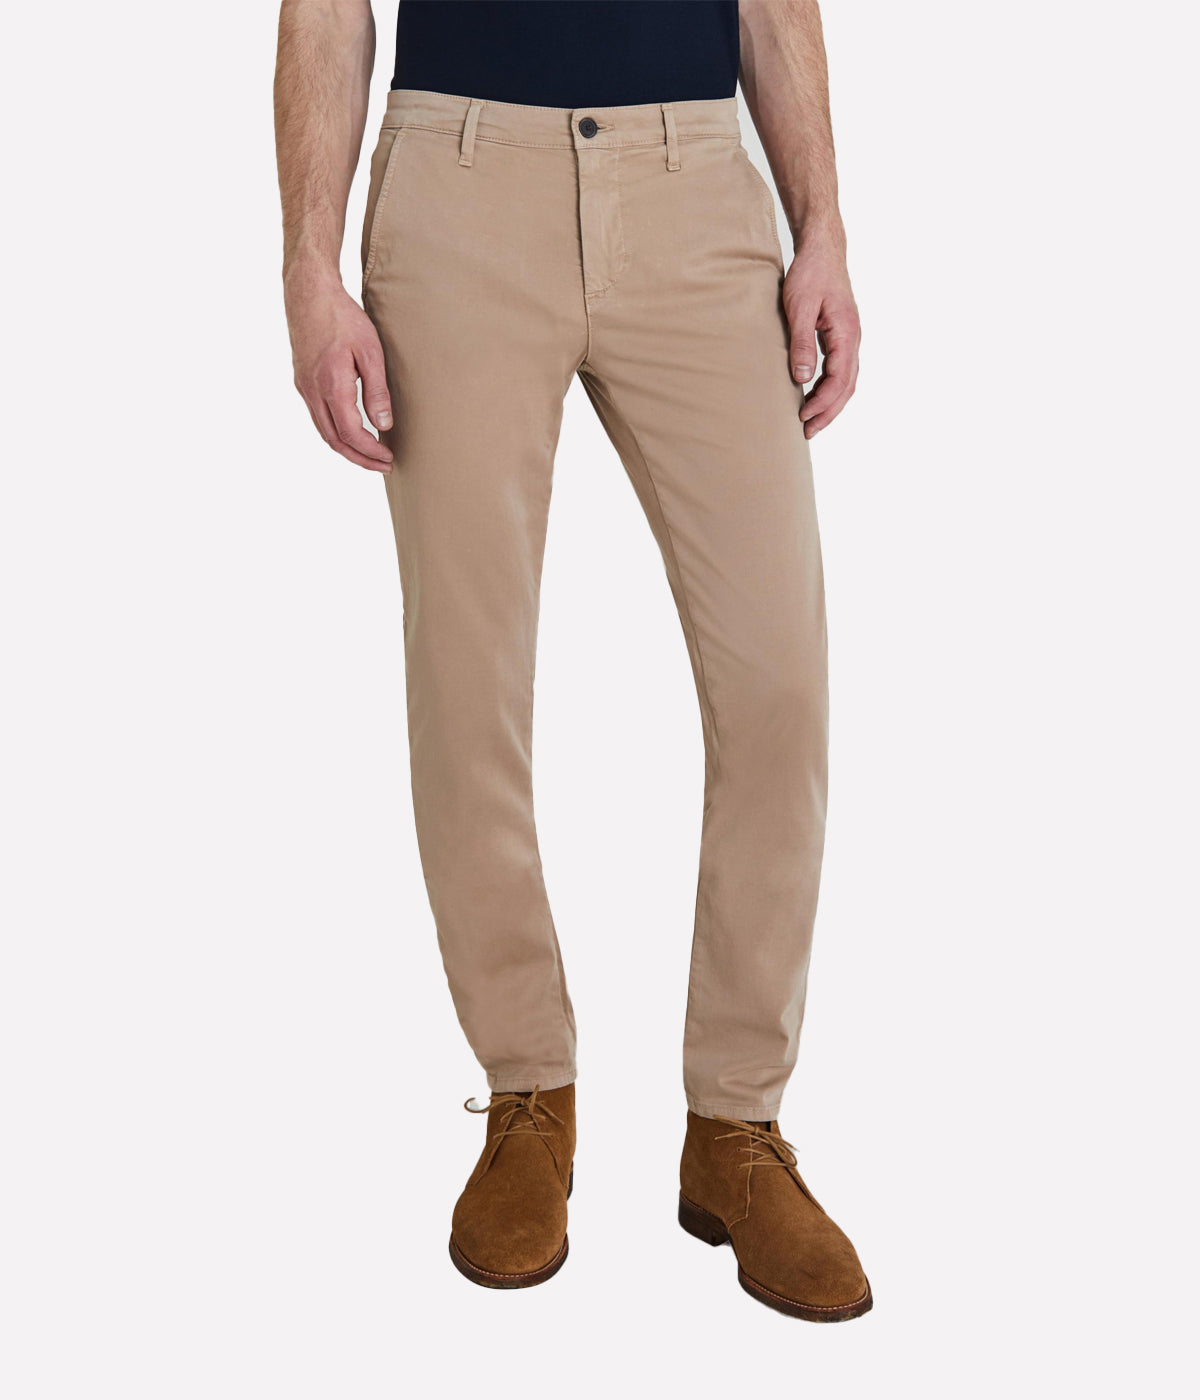 Jamison Skinny Chino in Parched Trail